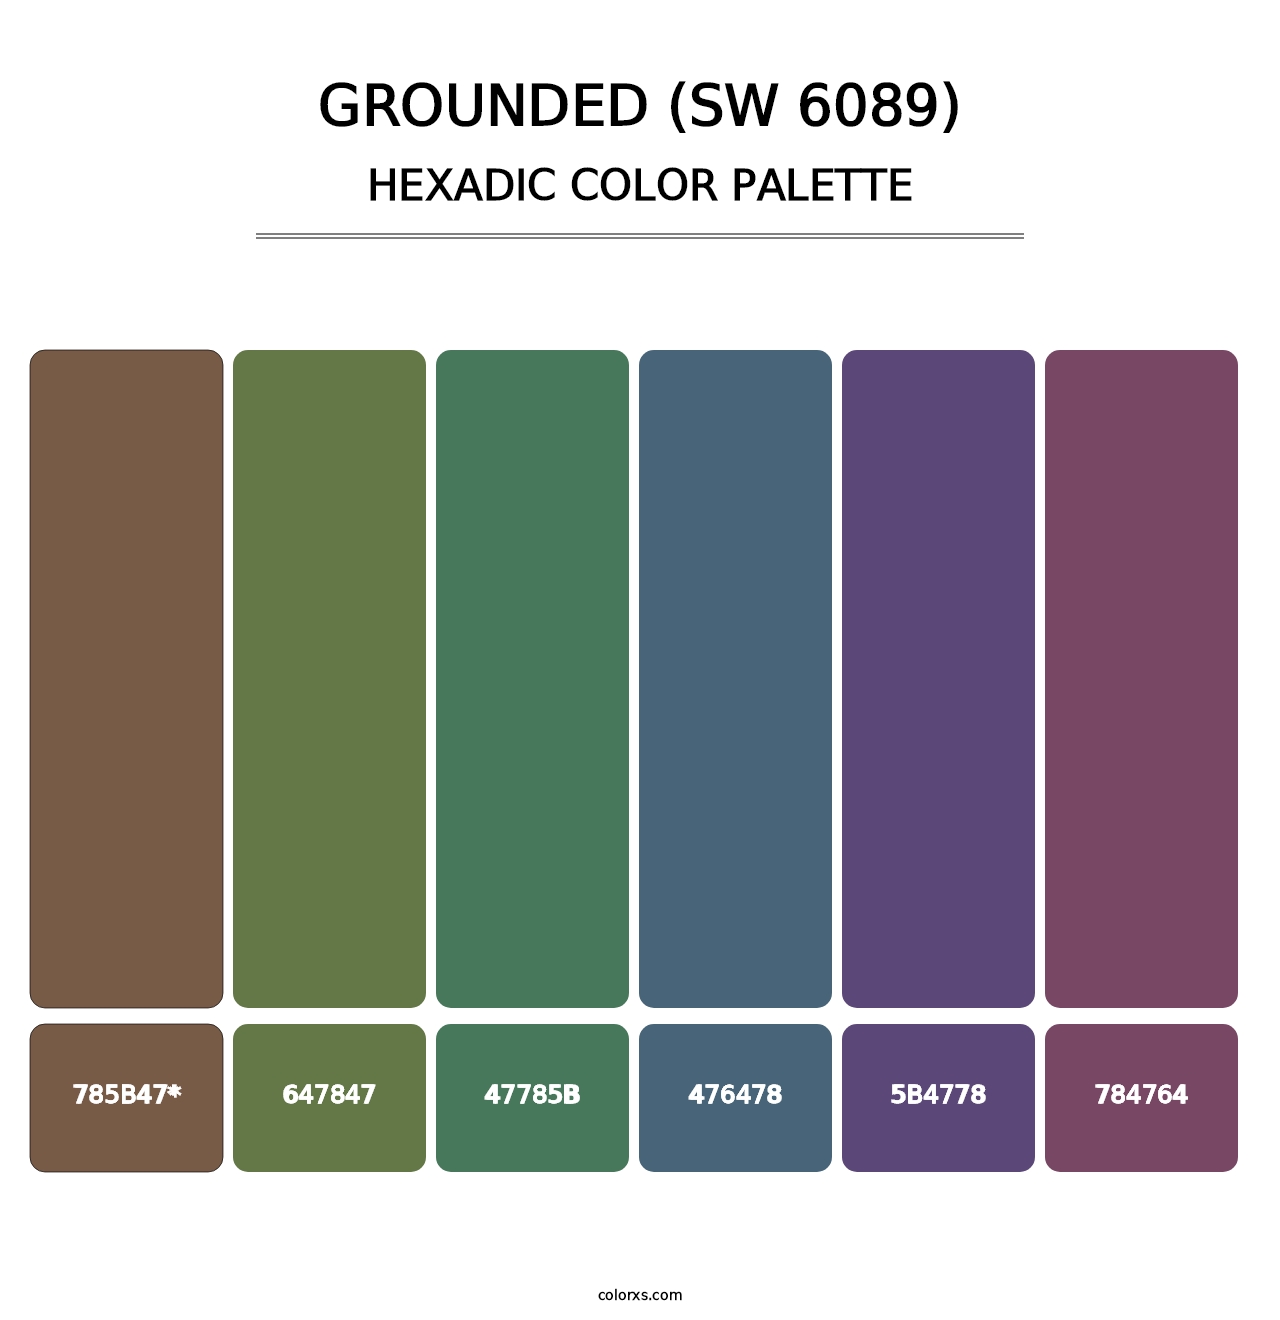 Grounded (SW 6089) - Hexadic Color Palette